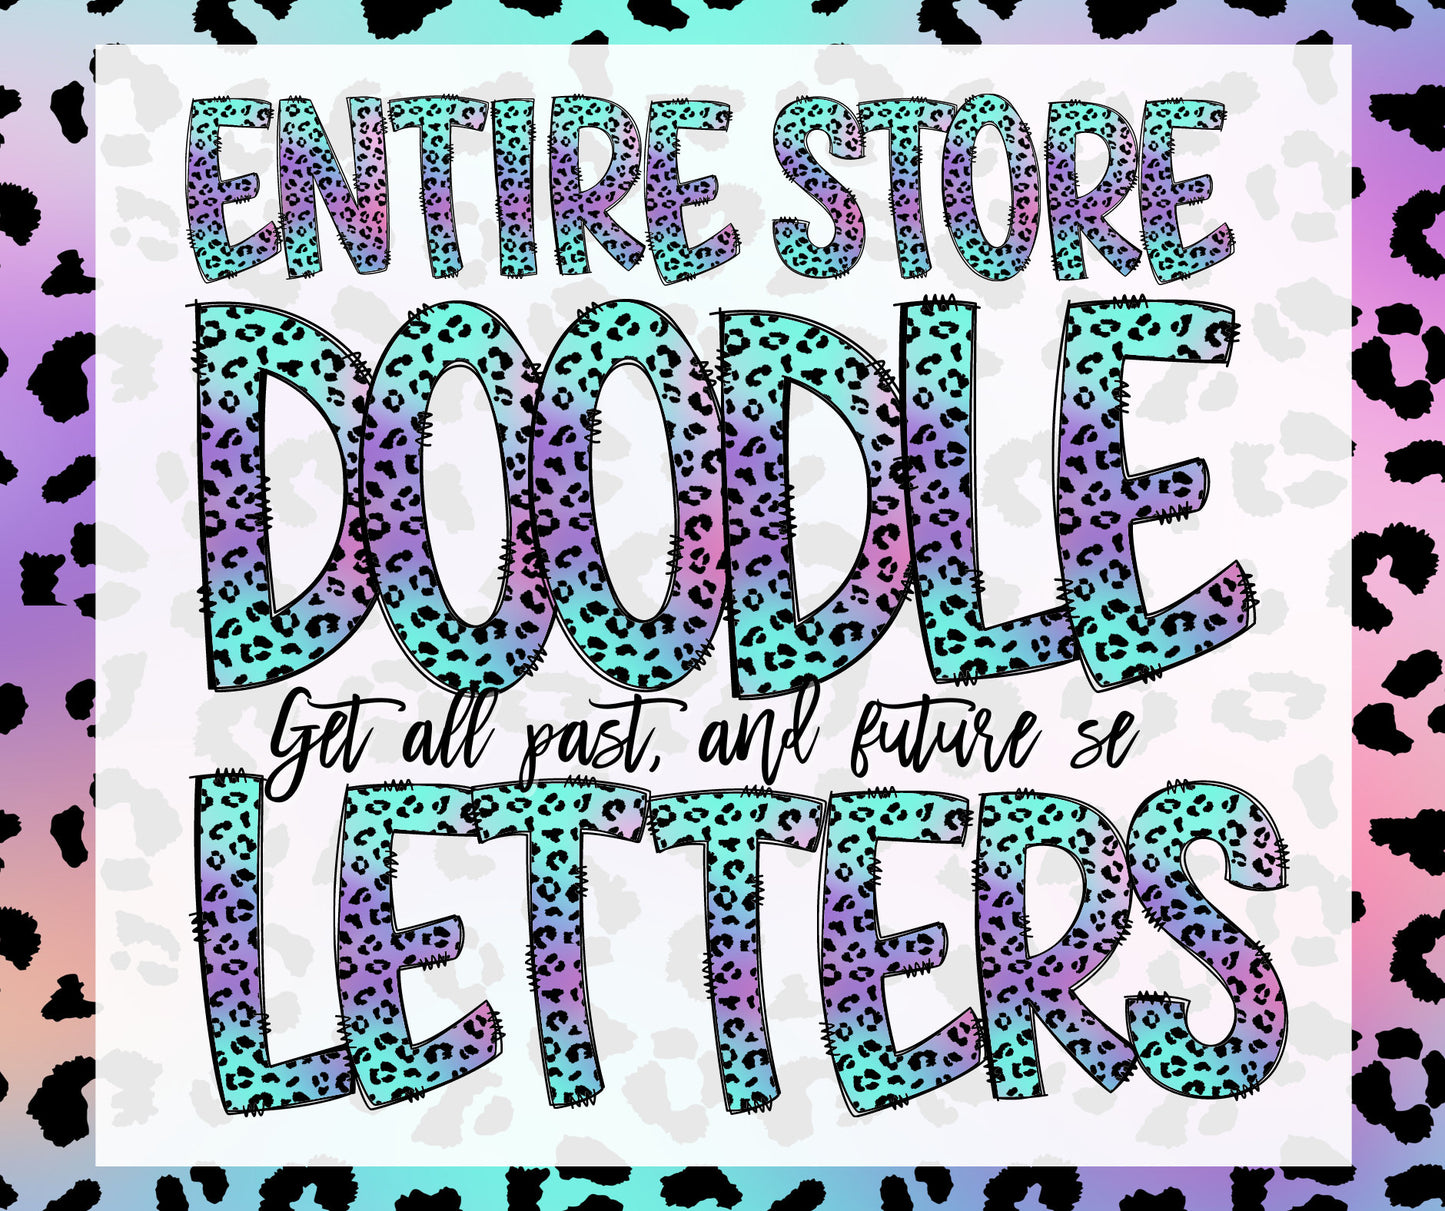 100 MEGA BUNDLE - Solid Varsity Doodle Letters! 100 Uppercase Entire Doodle Alphabet, Numbers Individually Saved PNG